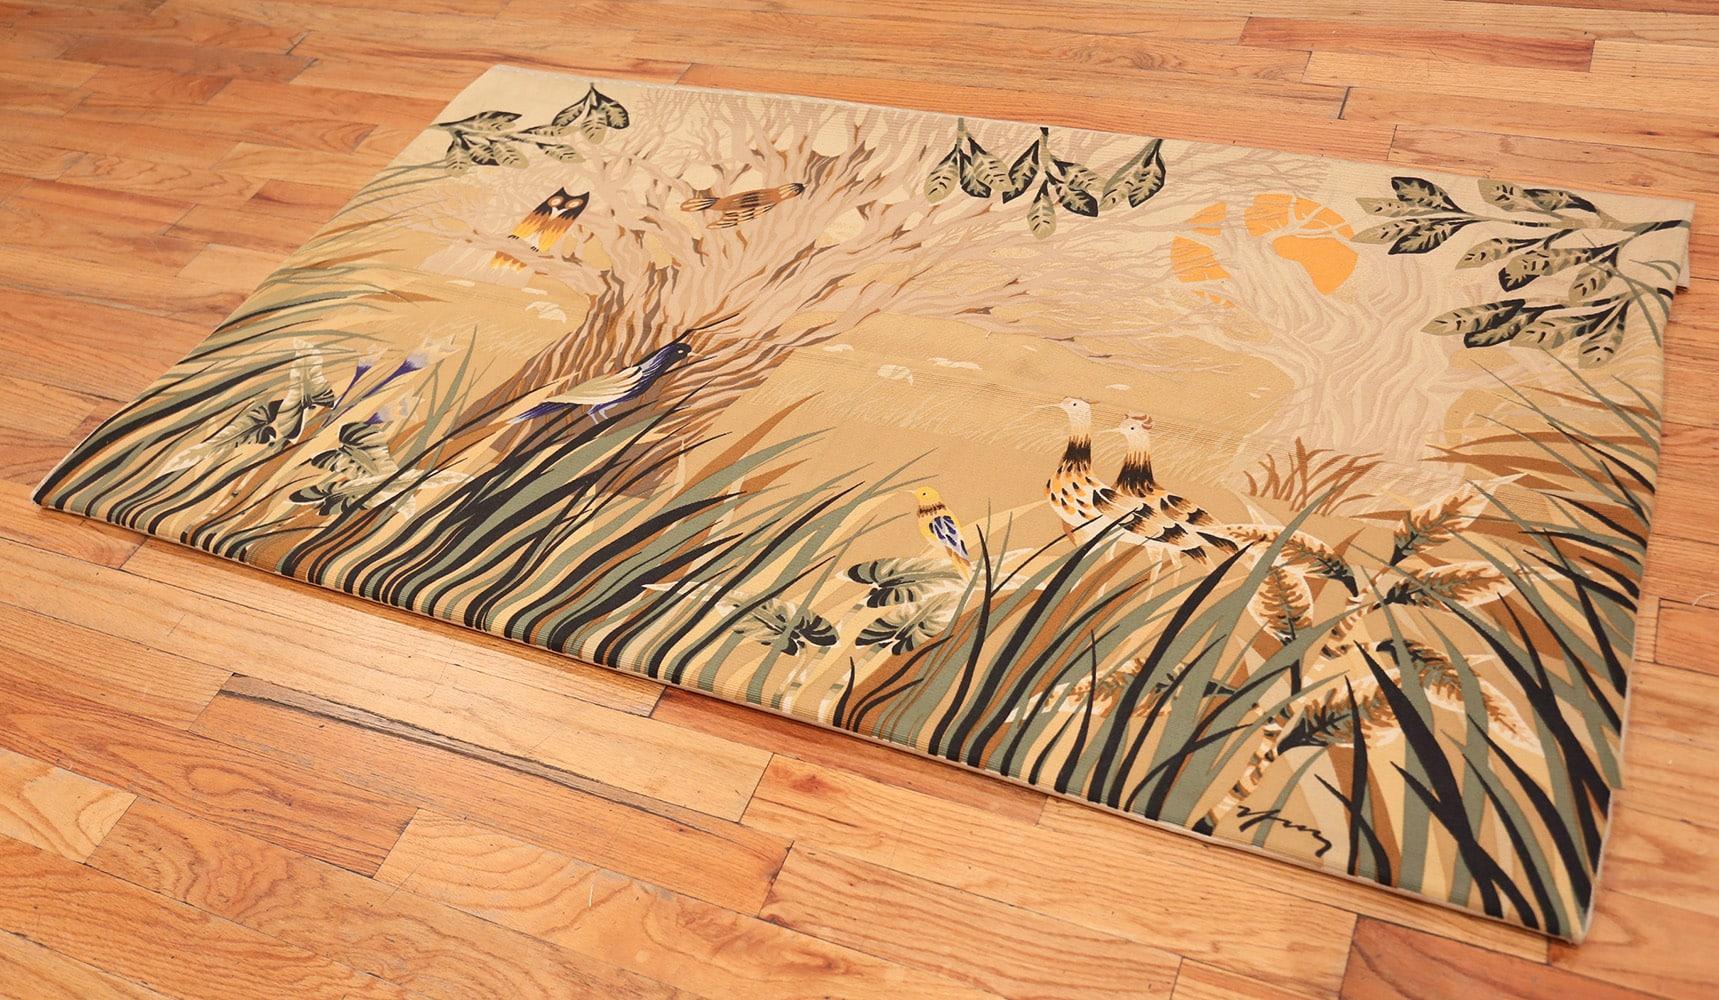 Vintage French Tapestry Rug, Origin: France, Circa: Mid 20th Century. Size: 6 ft x 3 ft 6 in (1.83 m x 1.07 m)

